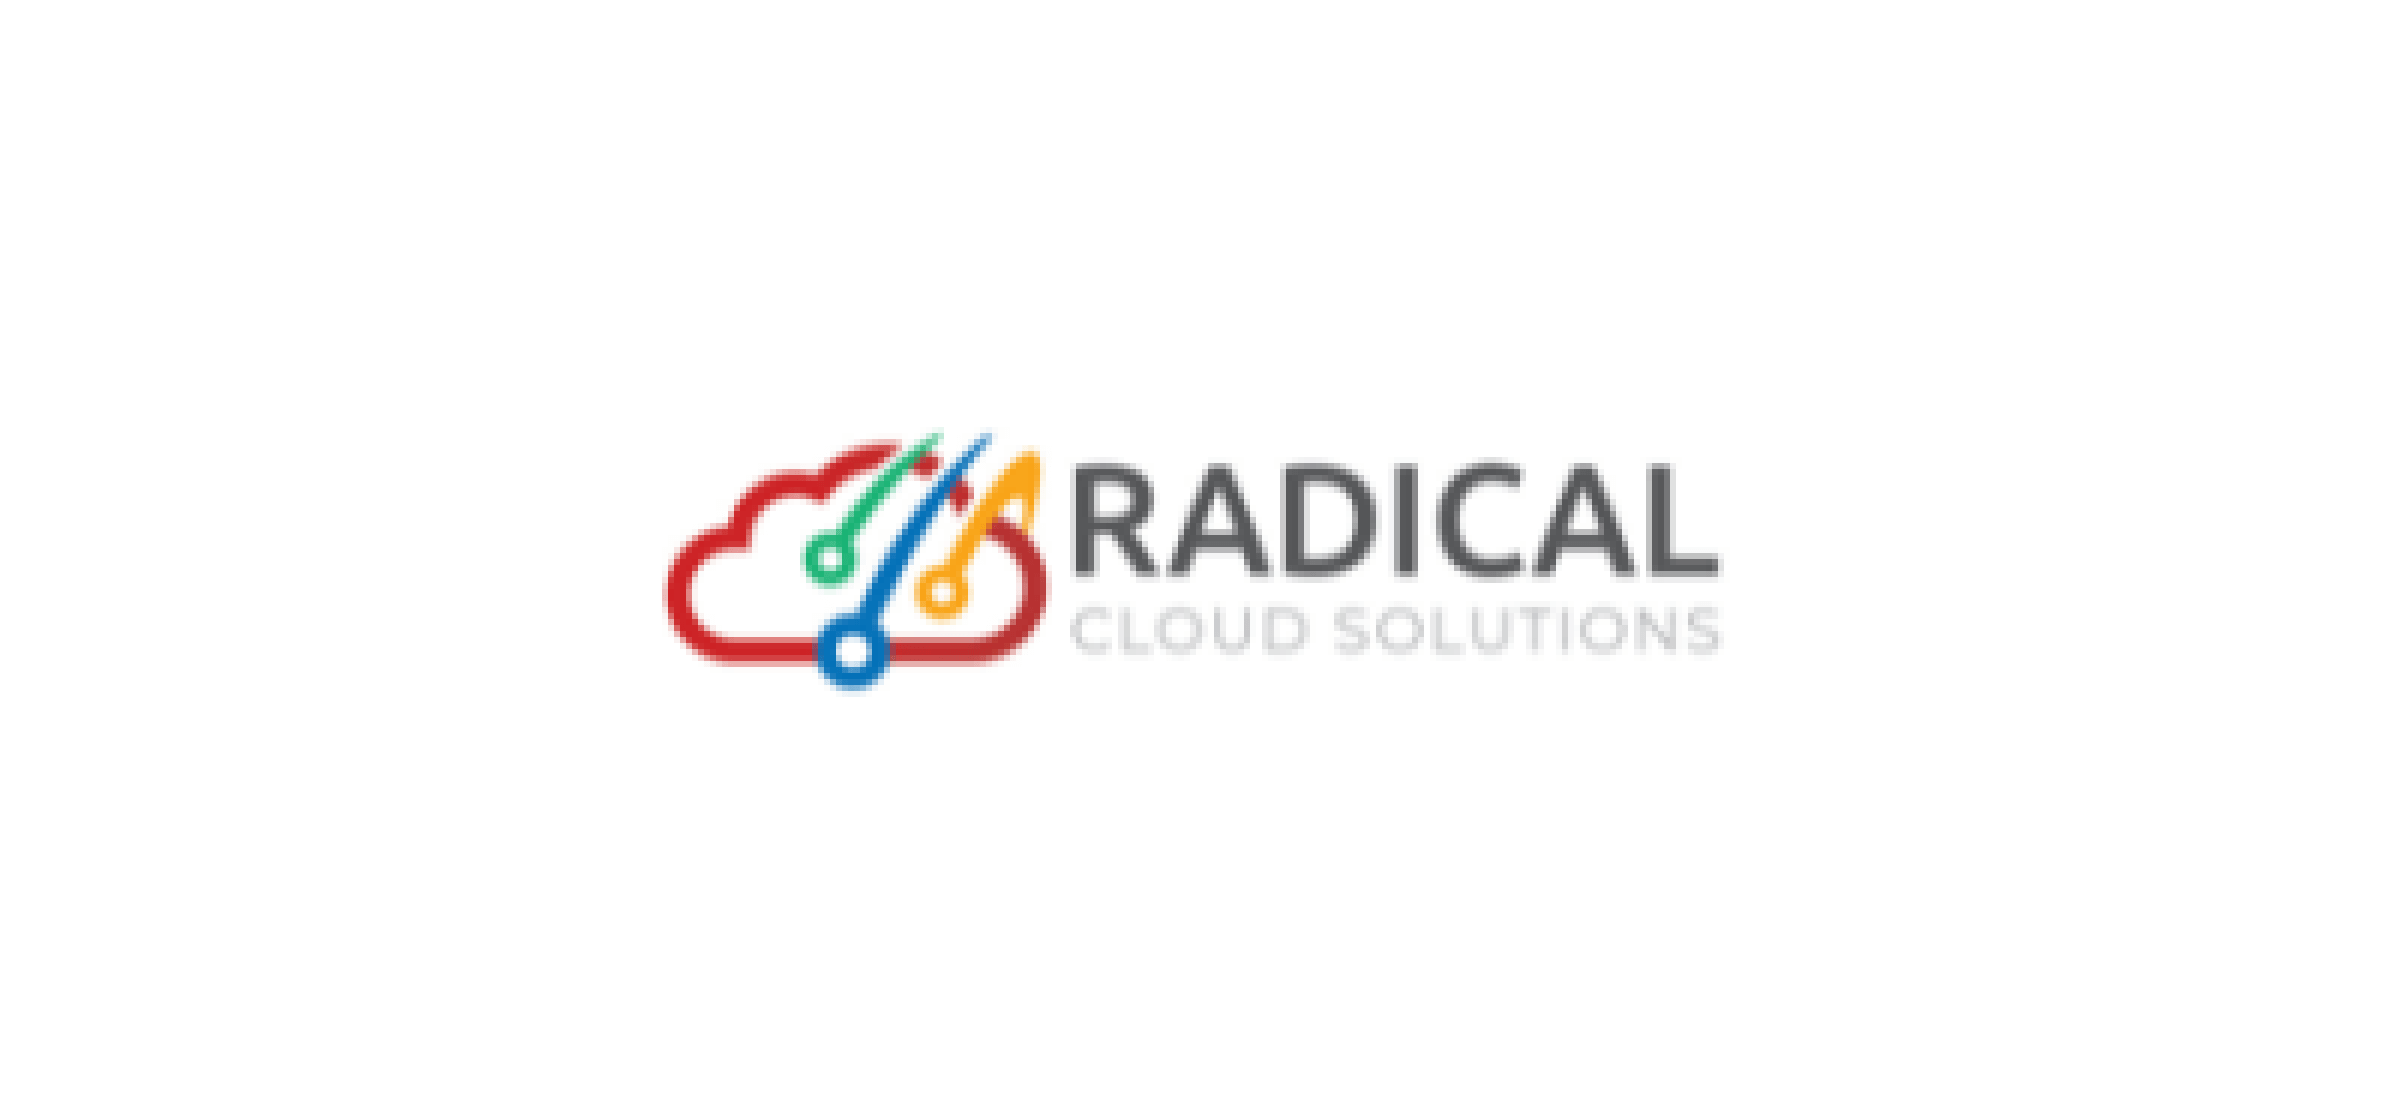 The Radical Cloud Solutions logo